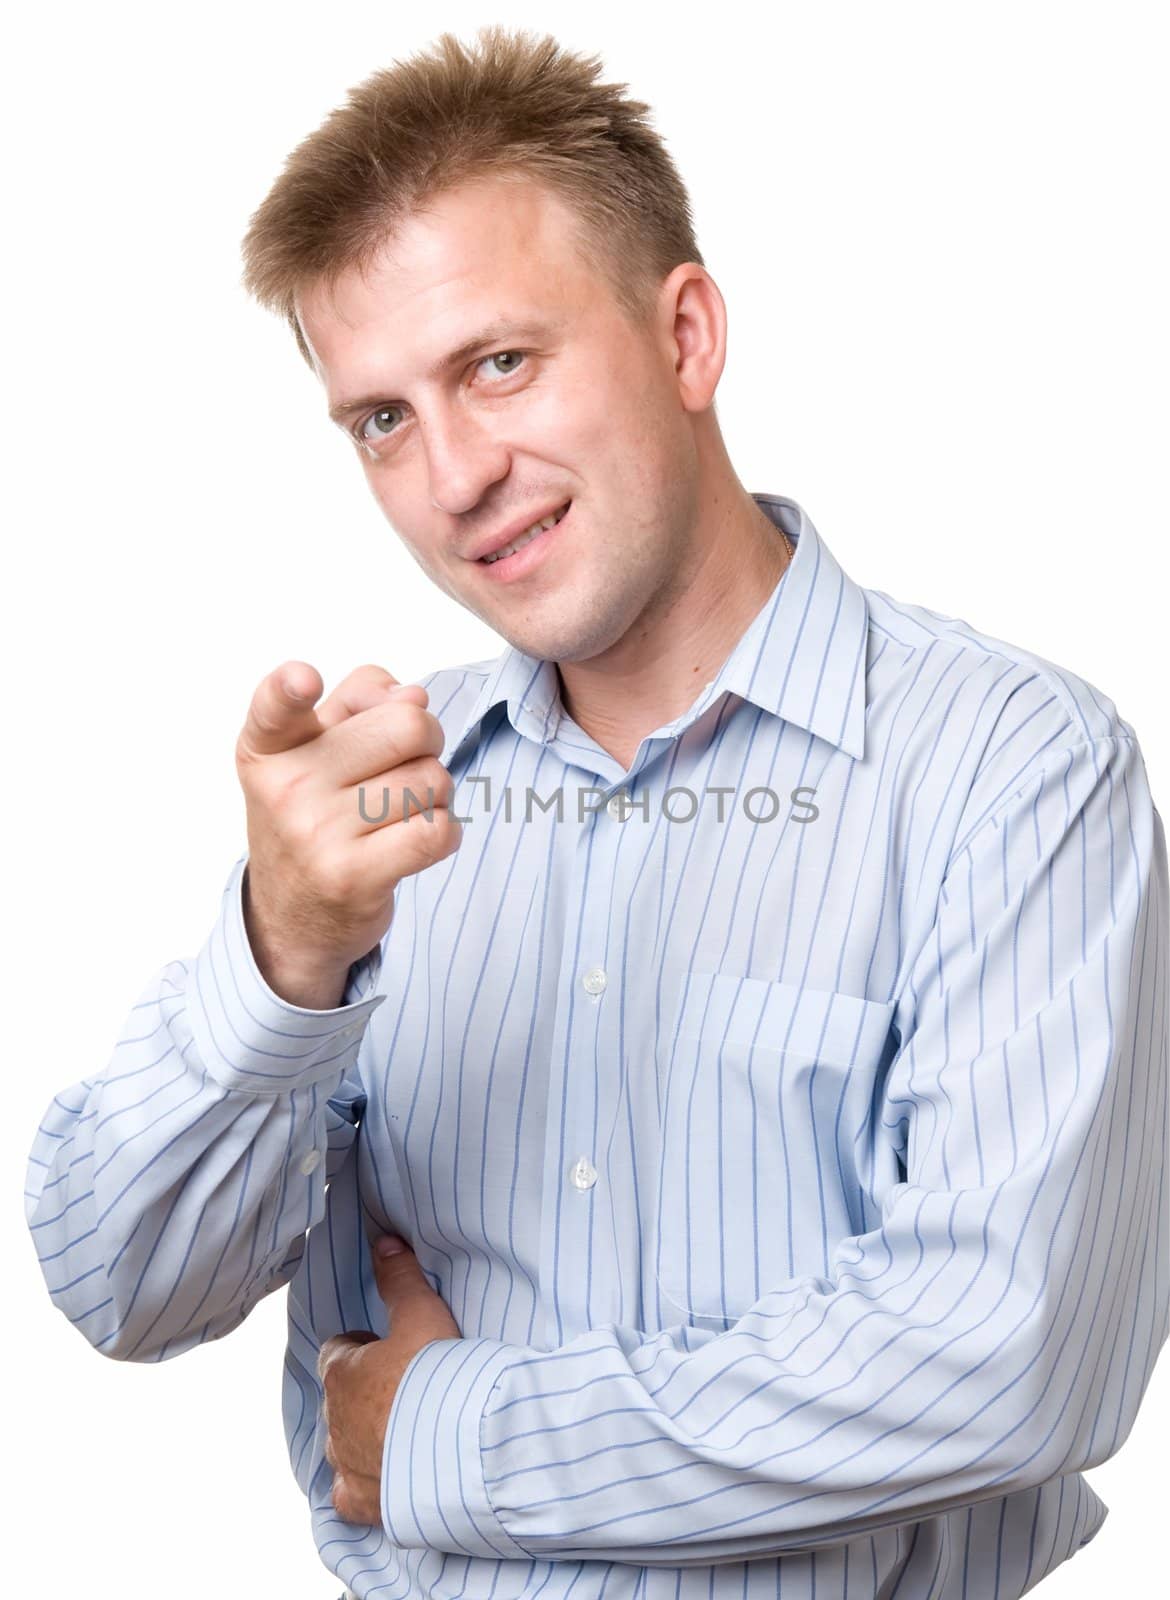 You. Man pointing at you on a white background.